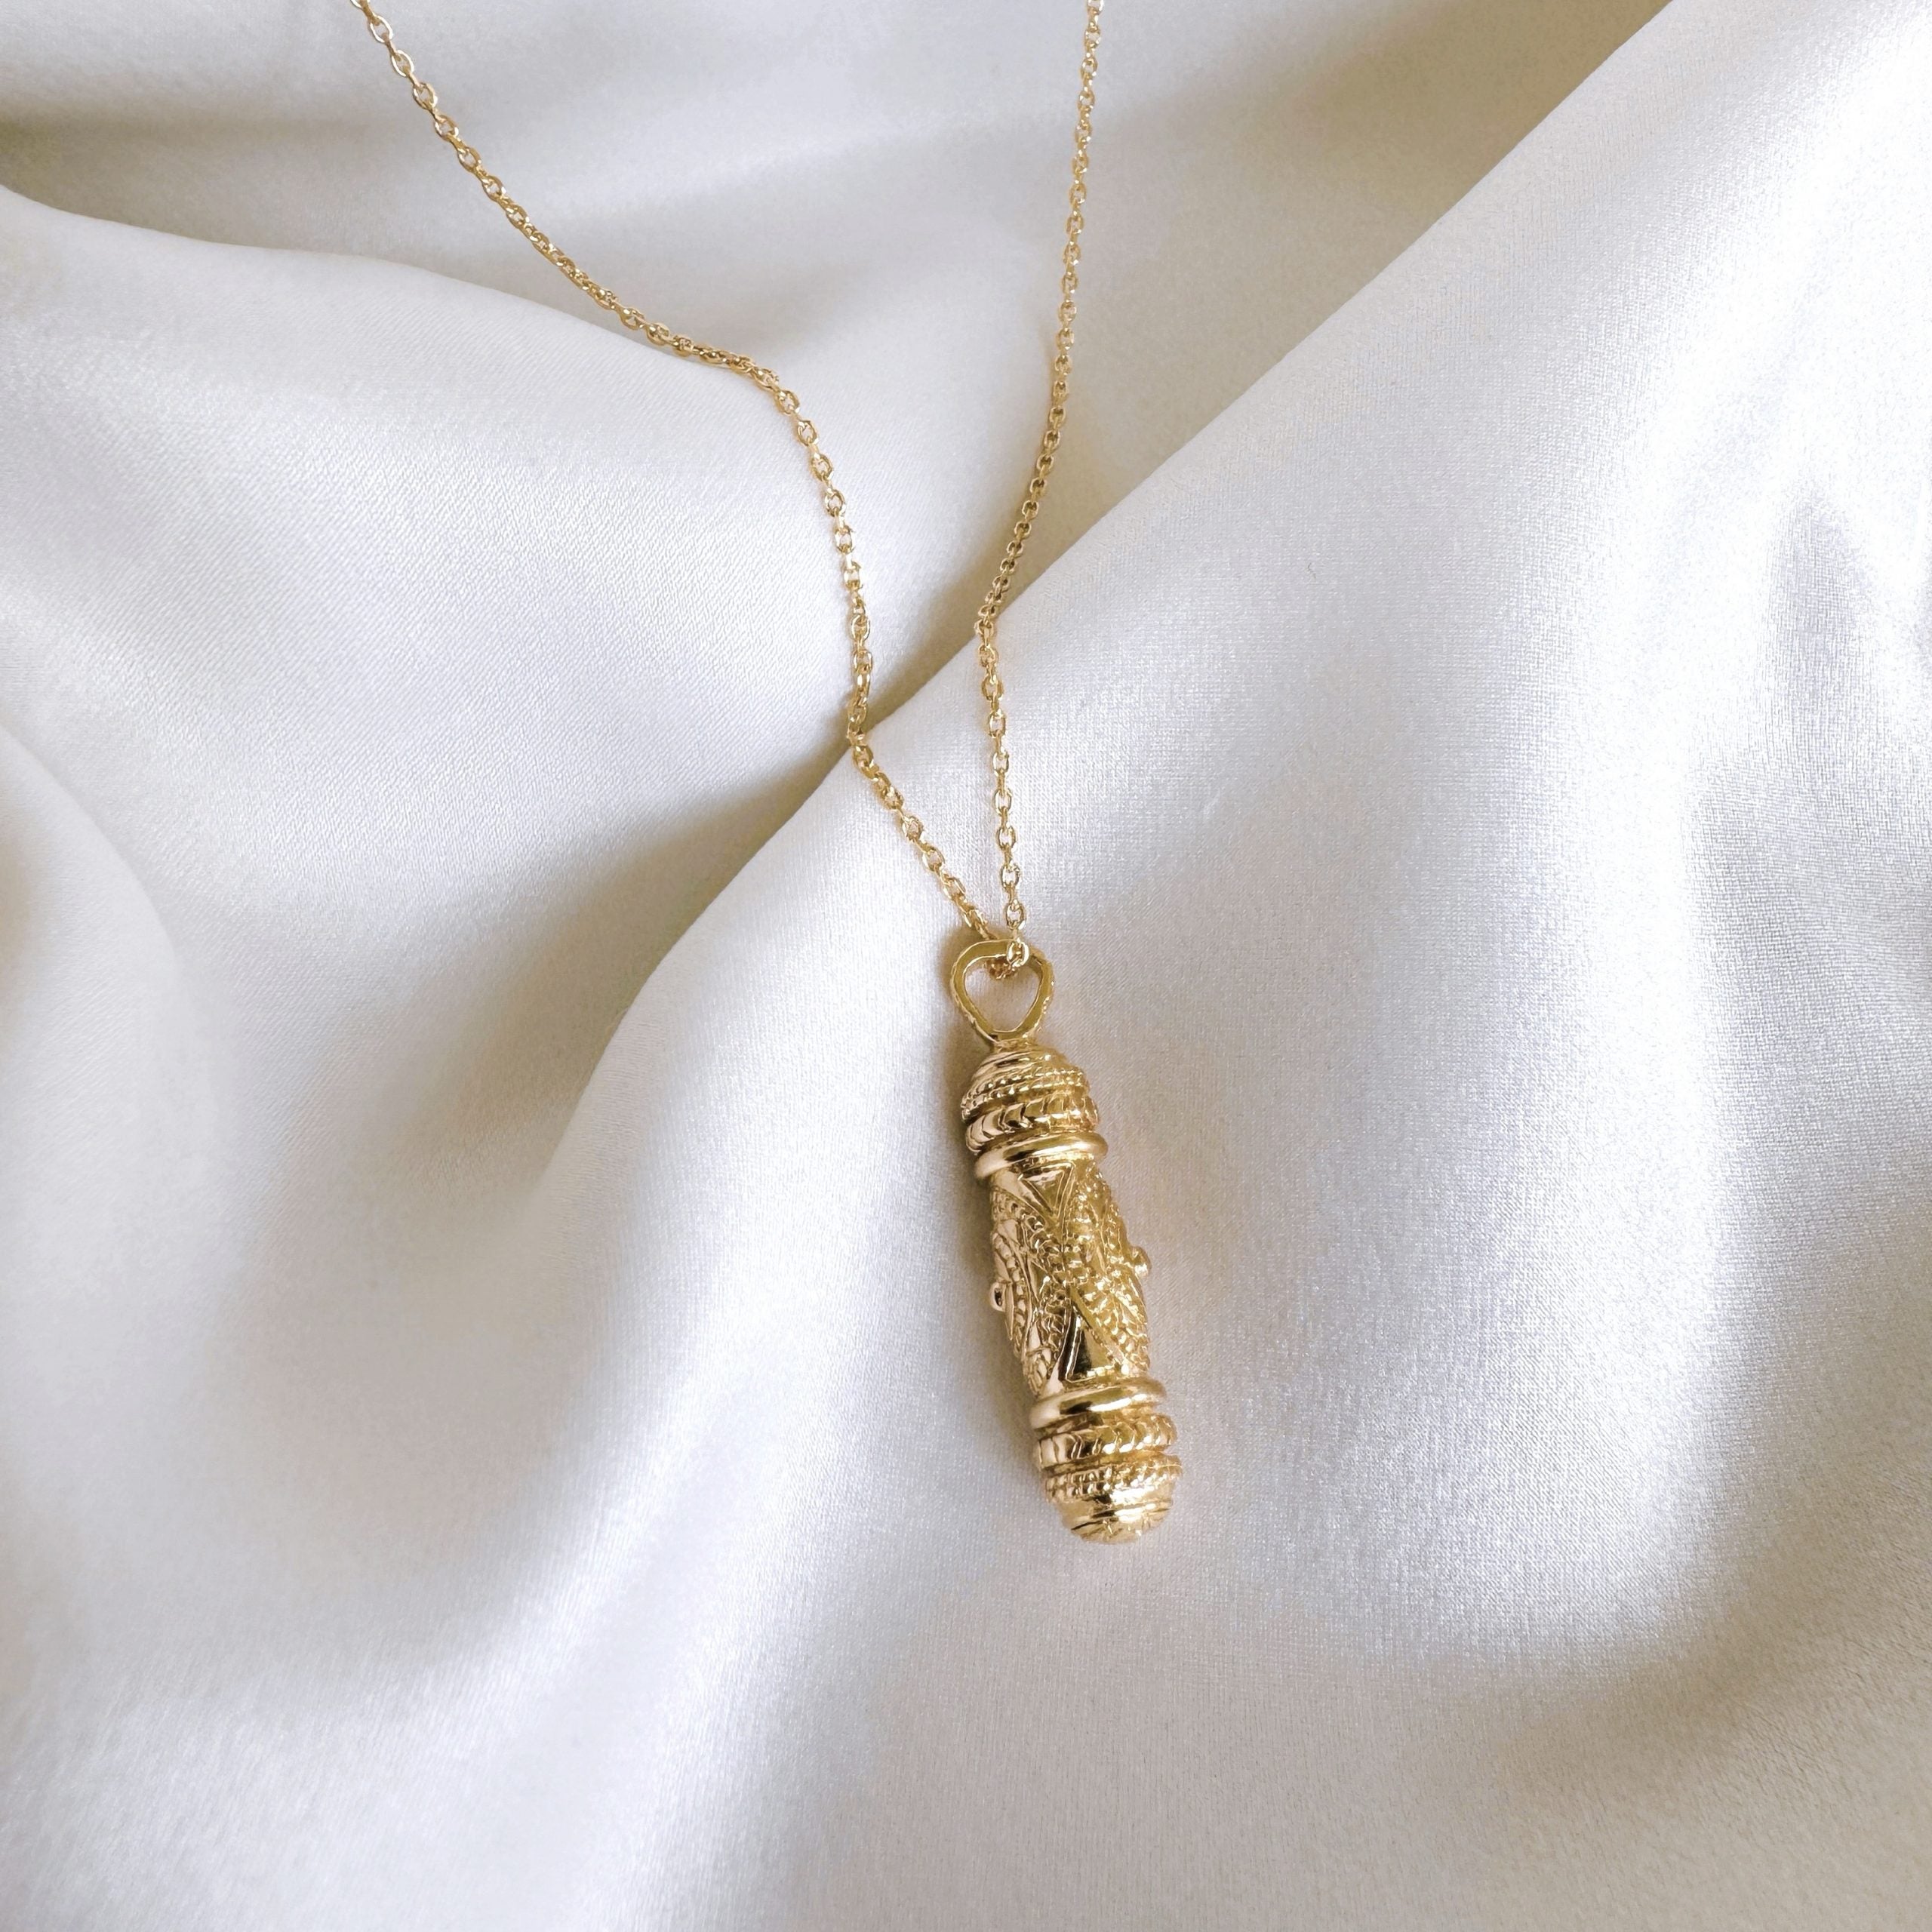 Gold-plated “Talisman” necklace